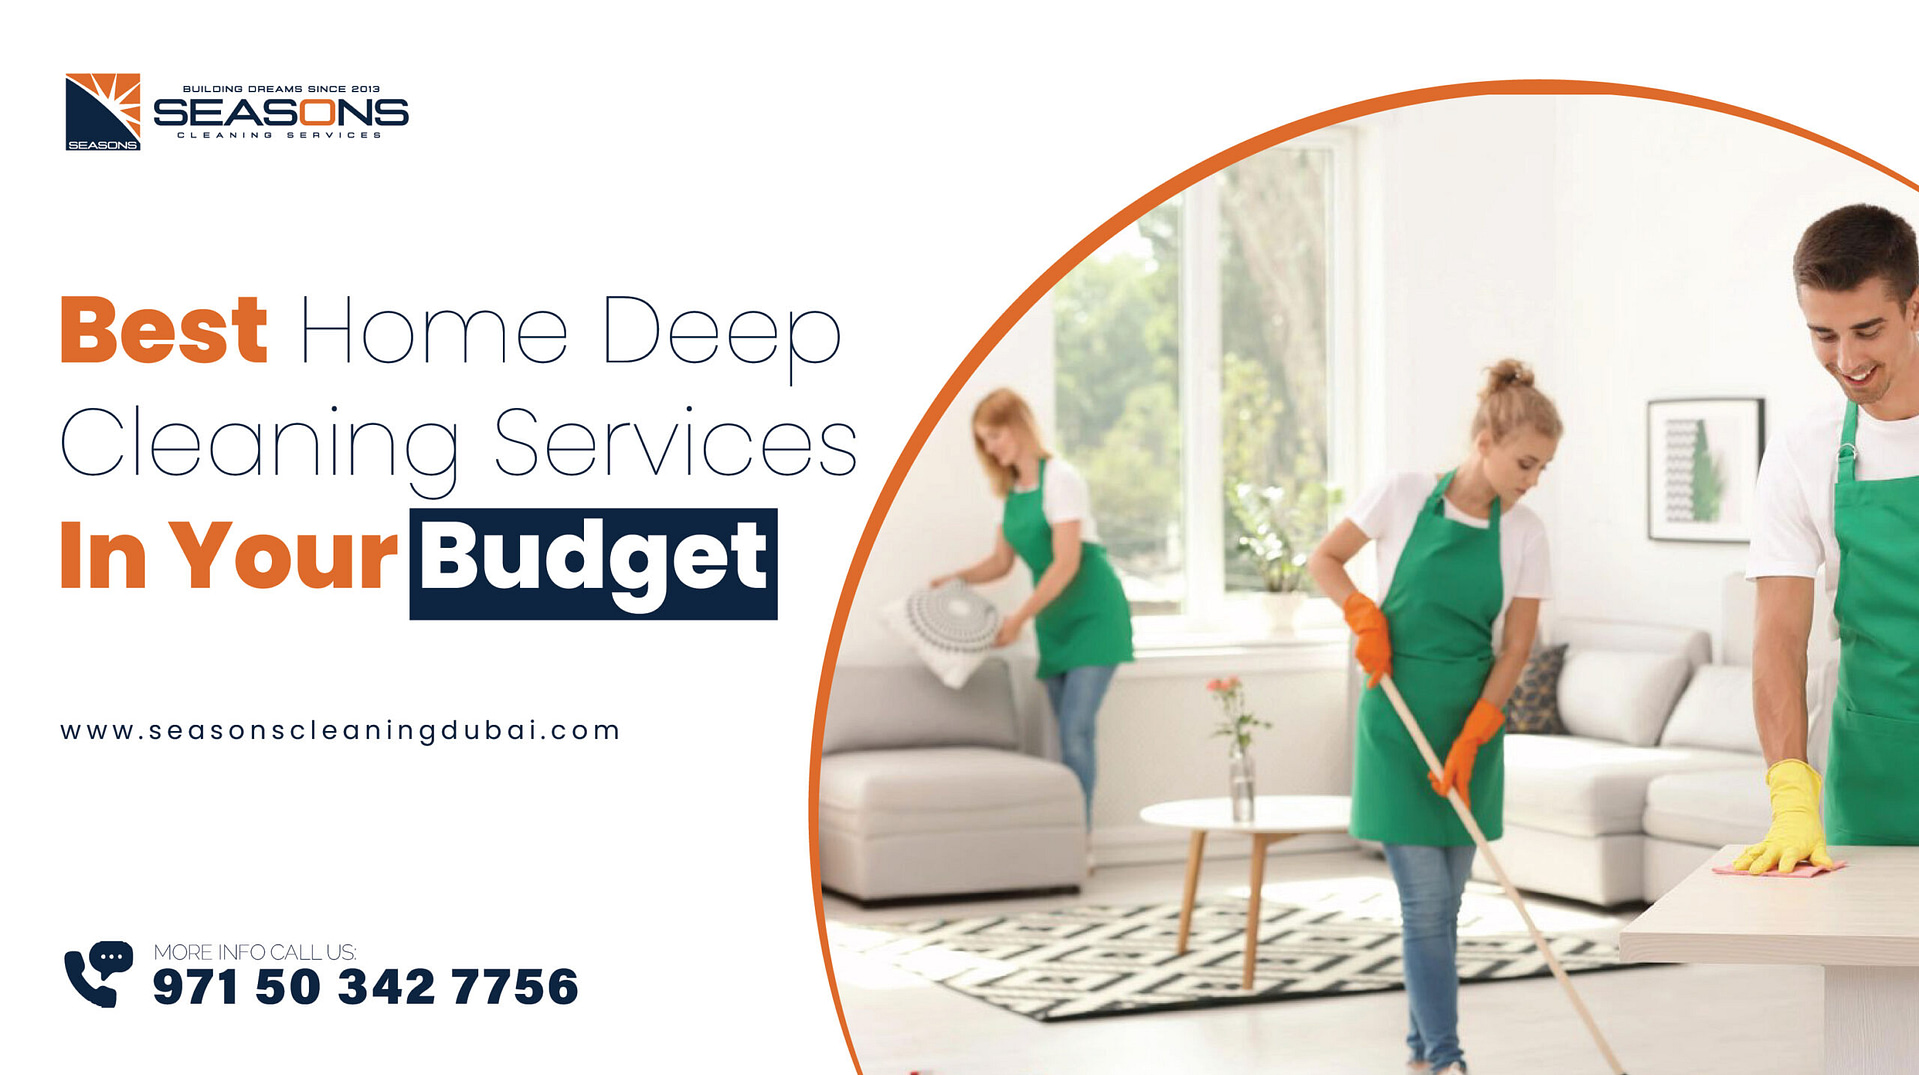 Best Home Deep Cleaning Services In Your Budget